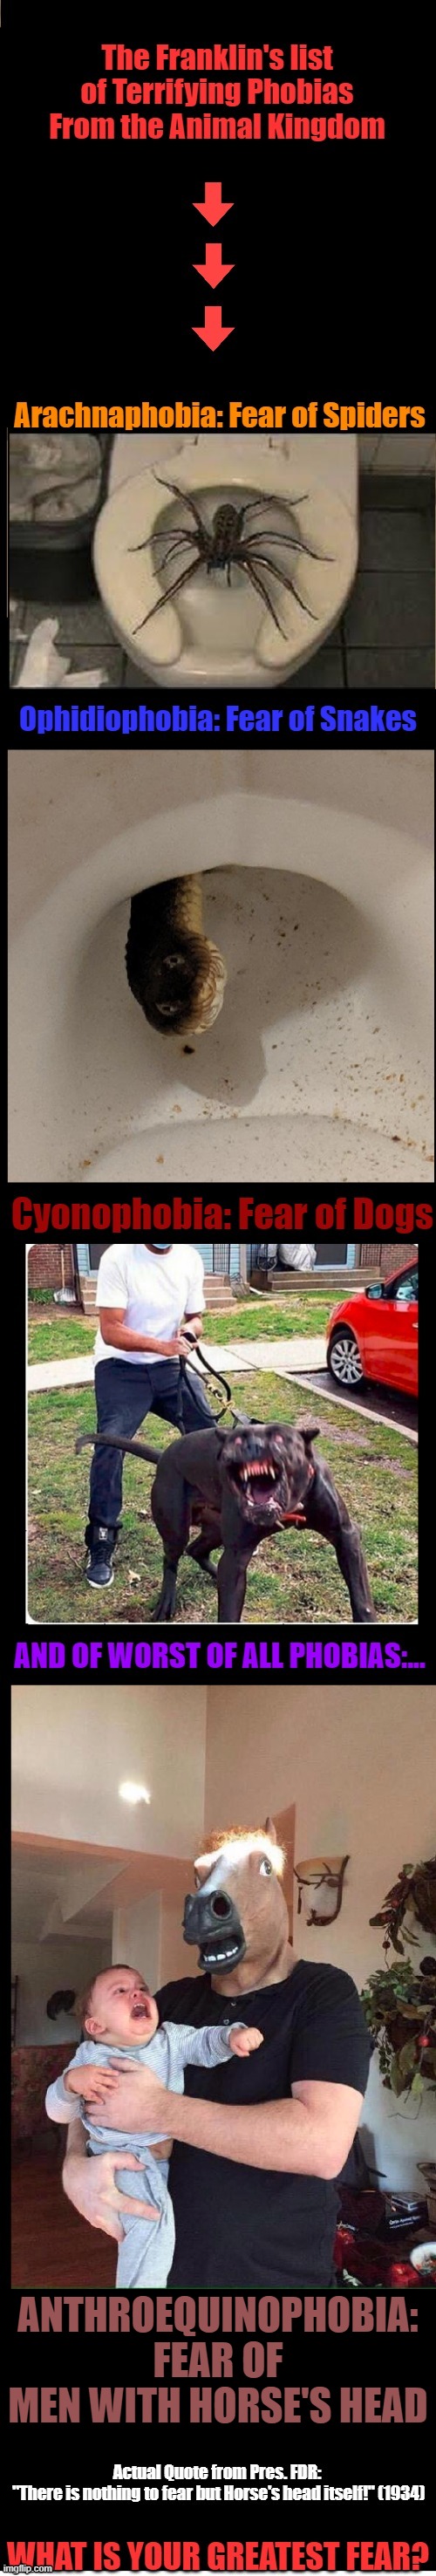 This Phobia is Real! | ANTHROEQUINOPHOBIA: FEAR OF MEN WITH HORSE'S HEAD | image tagged in memes,phobia,fear,spiders,snakes,dogs | made w/ Imgflip meme maker